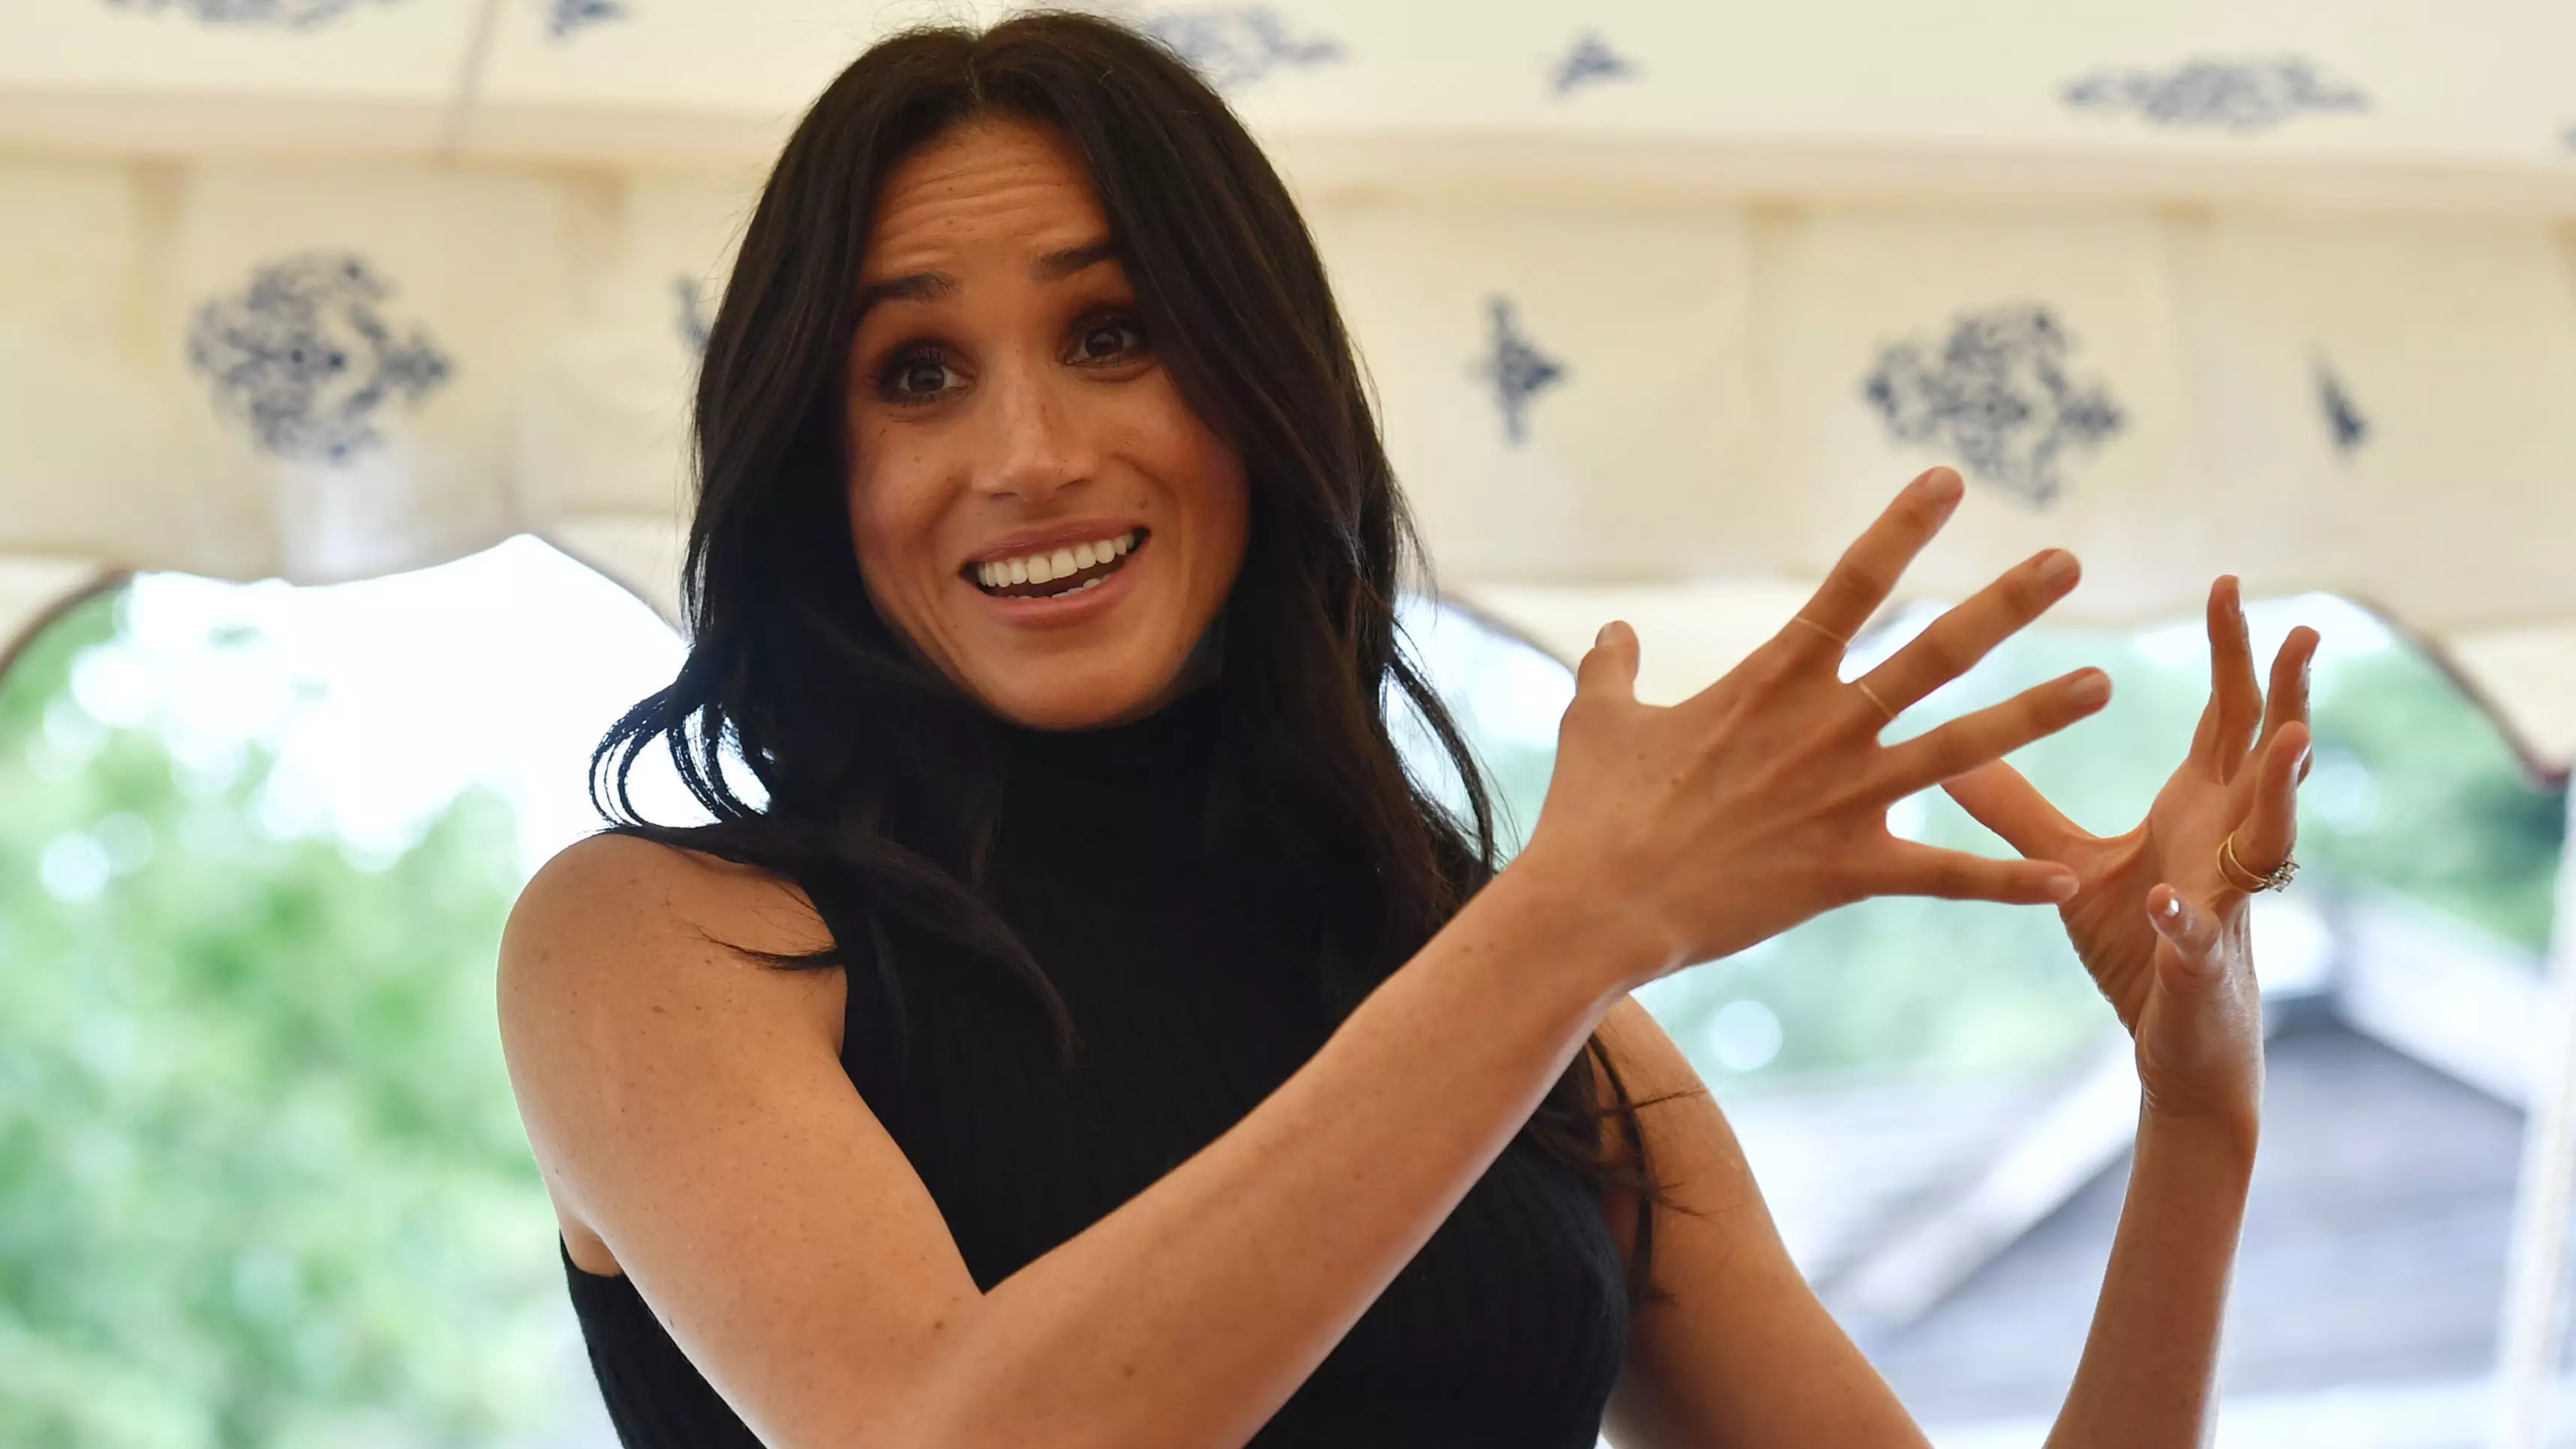 Meghan Markle Made Her First Public Speech Without Any Notes And It Was Absolutely Flawless